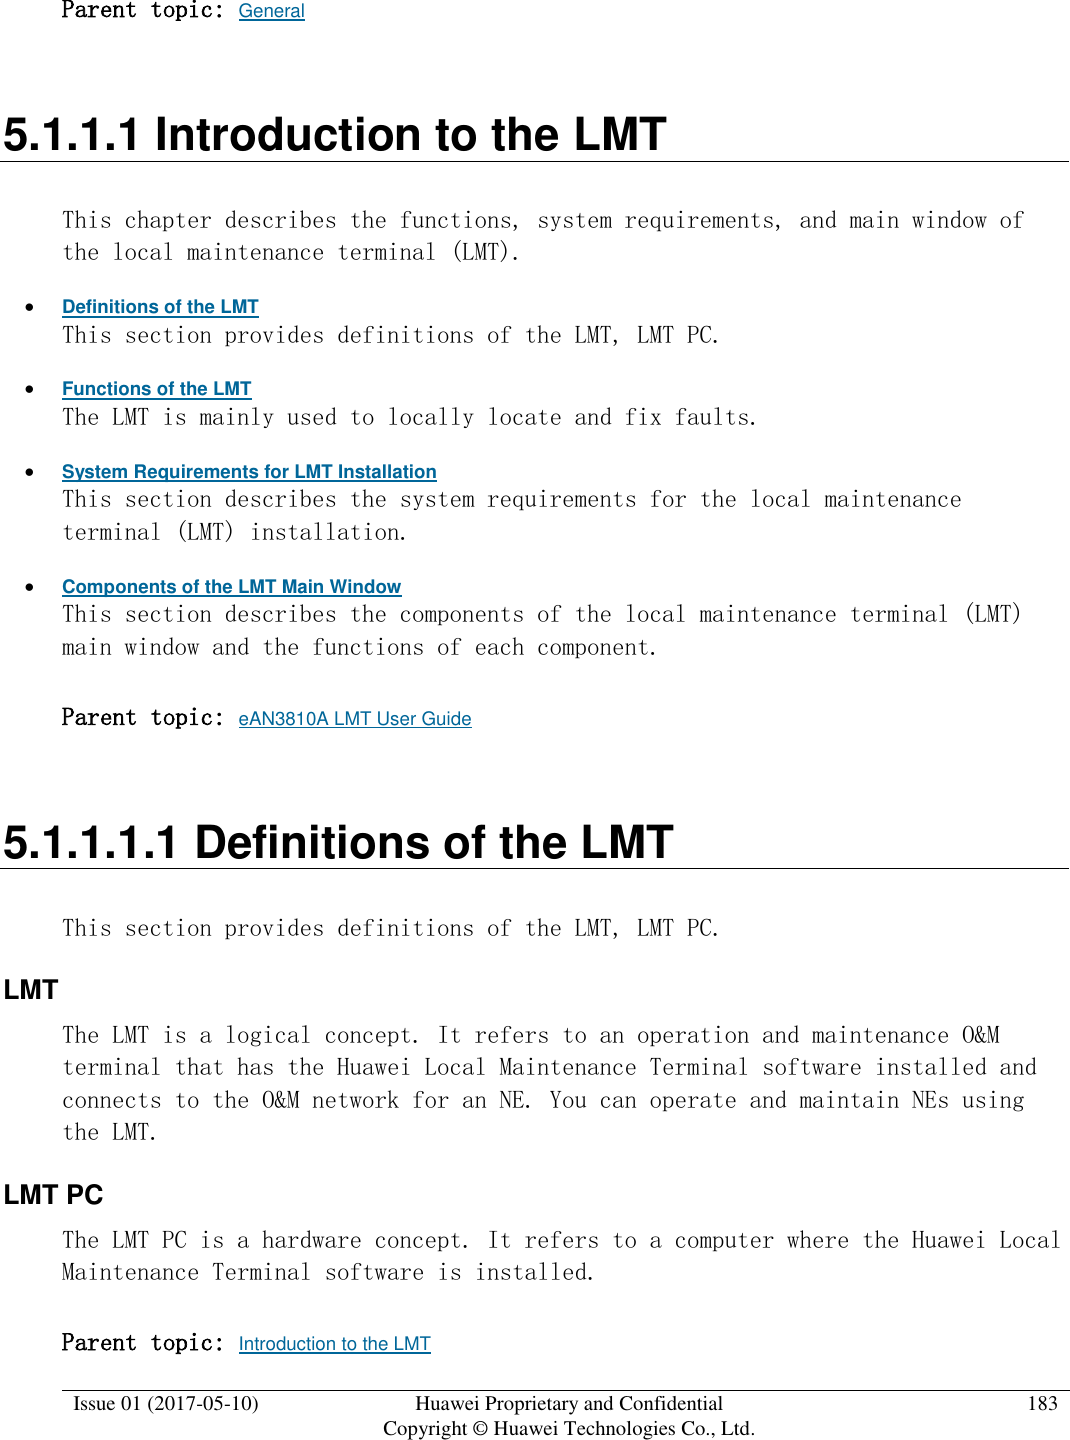  Issue 01 (2017-05-10) Huawei Proprietary and Confidential      Copyright © Huawei Technologies Co., Ltd. 183  Parent topic: General 5.1.1.1 Introduction to the LMT This chapter describes the functions, system requirements, and main window of the local maintenance terminal (LMT).  Definitions of the LMT This section provides definitions of the LMT, LMT PC.  Functions of the LMT The LMT is mainly used to locally locate and fix faults.  System Requirements for LMT Installation This section describes the system requirements for the local maintenance terminal (LMT) installation.  Components of the LMT Main Window This section describes the components of the local maintenance terminal (LMT) main window and the functions of each component.  Parent topic: eAN3810A LMT User Guide 5.1.1.1.1 Definitions of the LMT This section provides definitions of the LMT, LMT PC. LMT The LMT is a logical concept. It refers to an operation and maintenance O&amp;M terminal that has the Huawei Local Maintenance Terminal software installed and connects to the O&amp;M network for an NE. You can operate and maintain NEs using the LMT. LMT PC The LMT PC is a hardware concept. It refers to a computer where the Huawei Local Maintenance Terminal software is installed.  Parent topic: Introduction to the LMT 